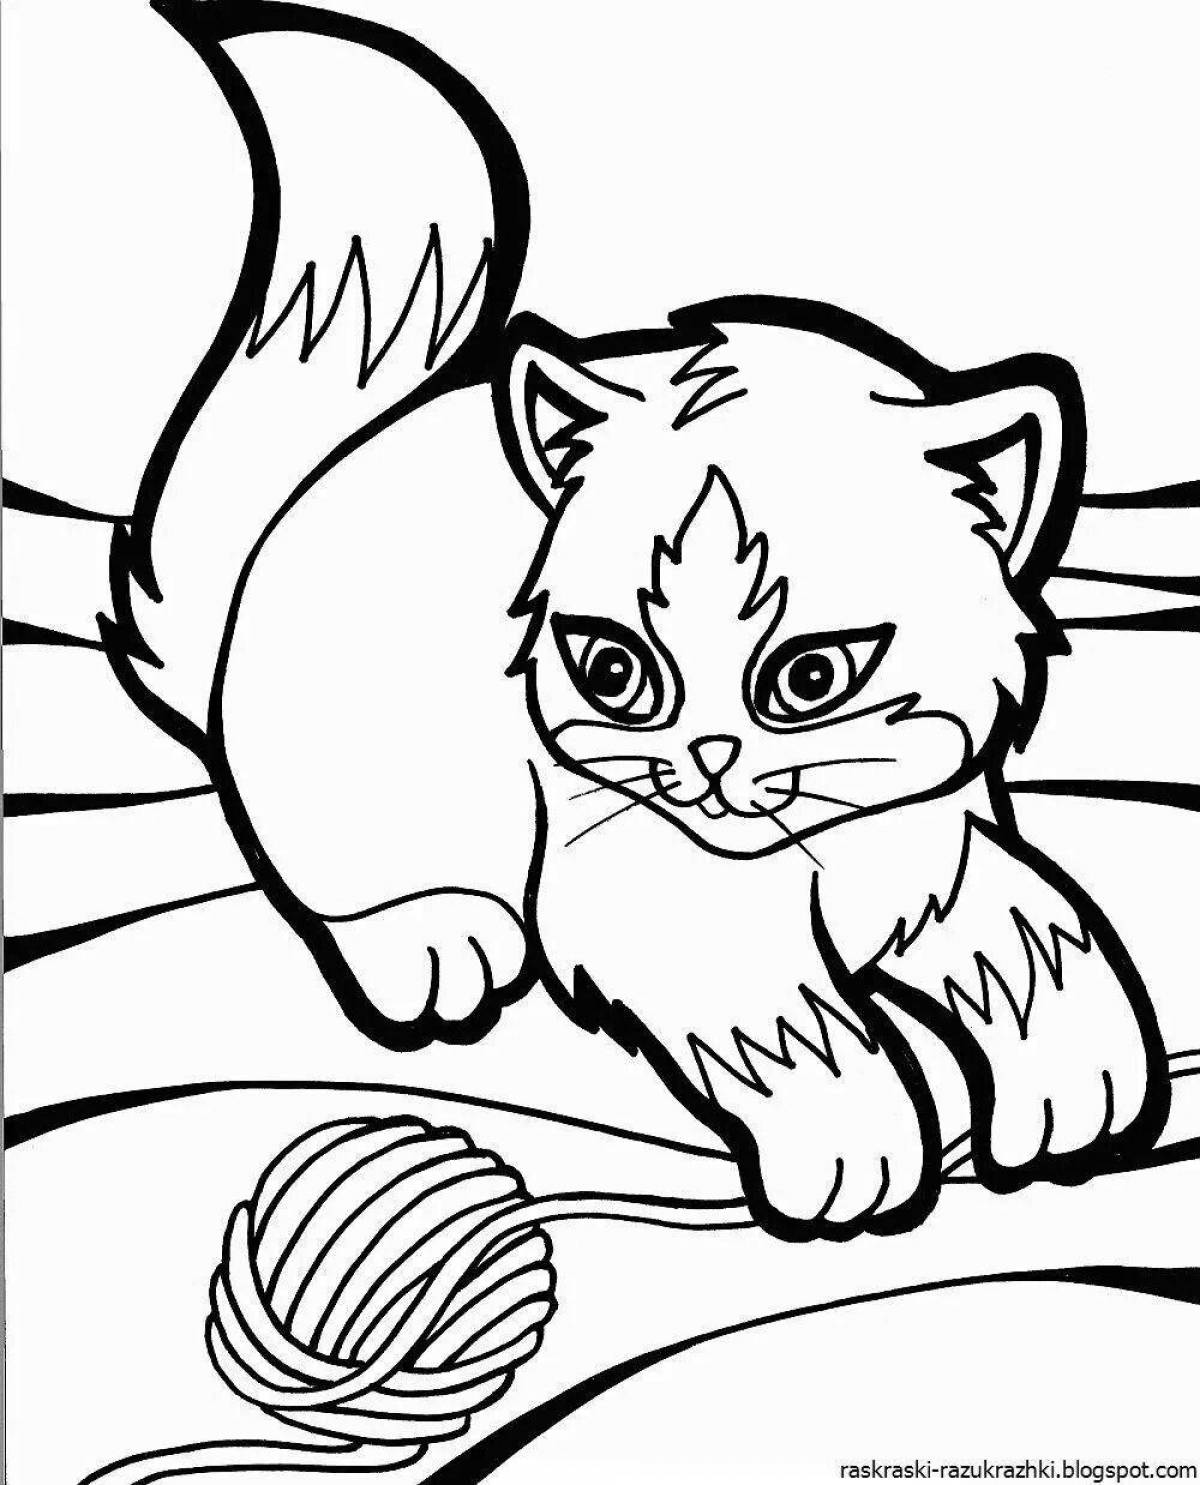 Sparkling coloring book for girls, cats and kittens